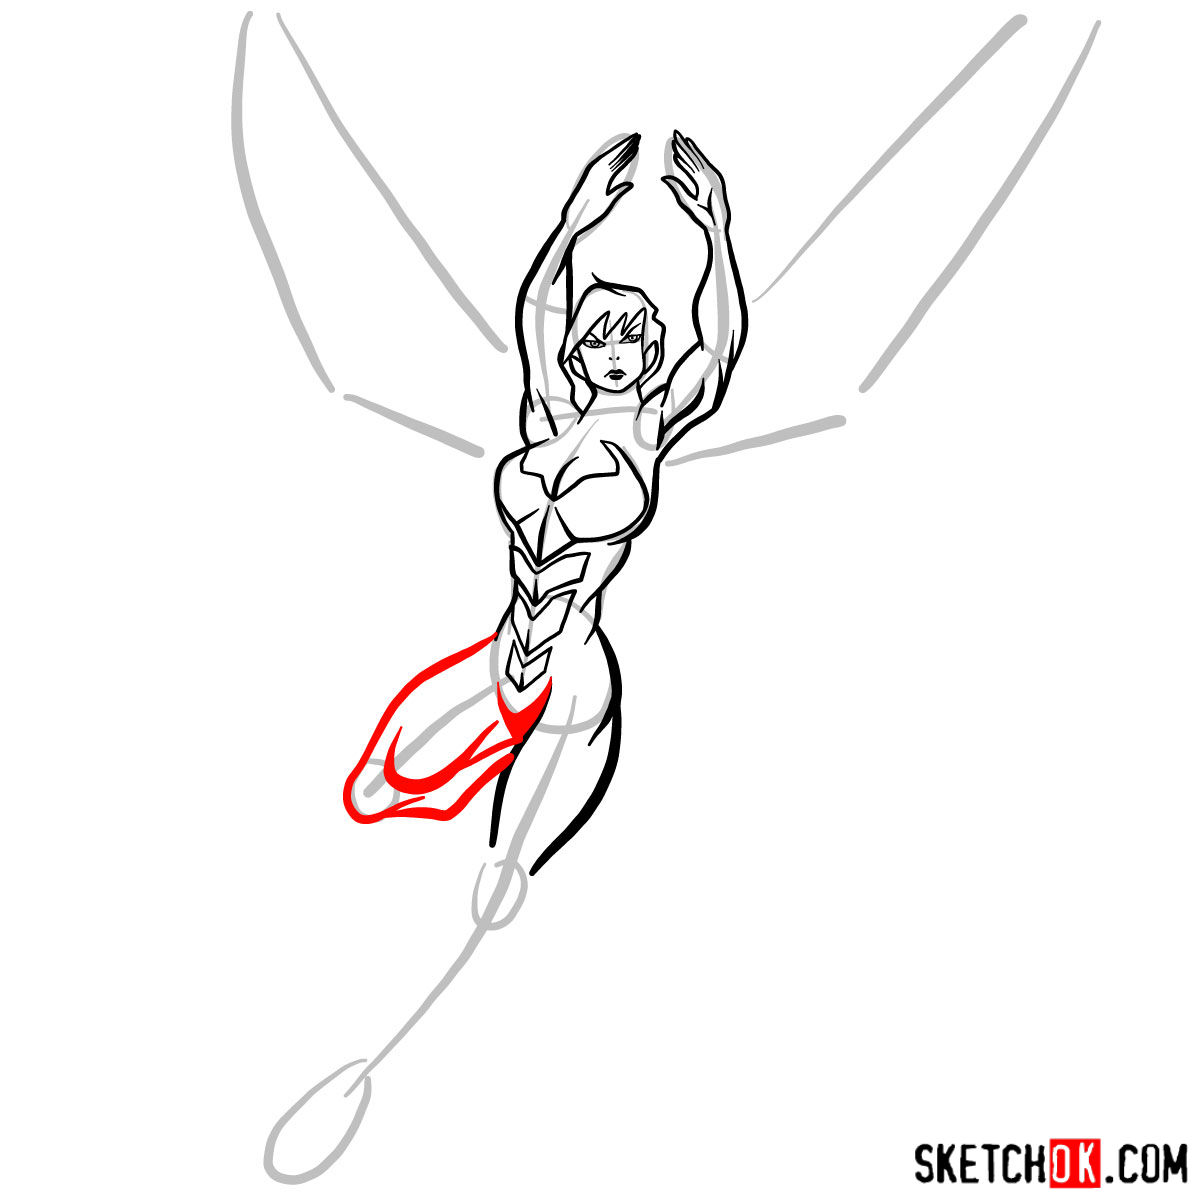 How to draw Wasp, Janet van Dyne from Marvel Comics - step 10